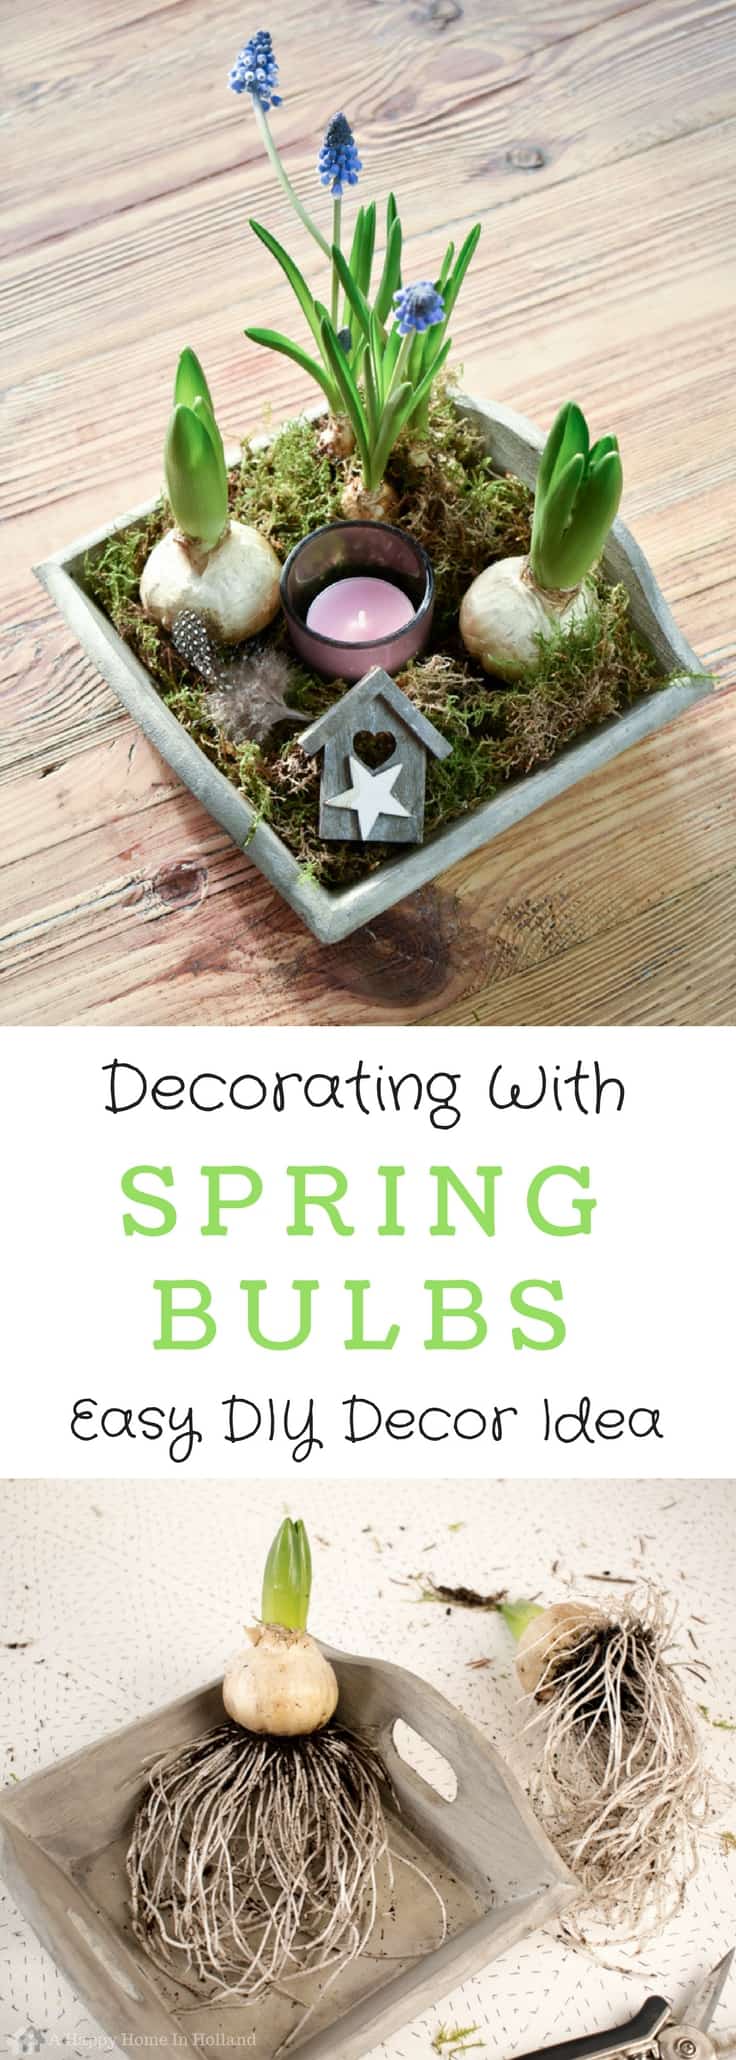 Learn how to make a simple and stylish spring bulb arrangement using hyacinths and blue muscari bulbs